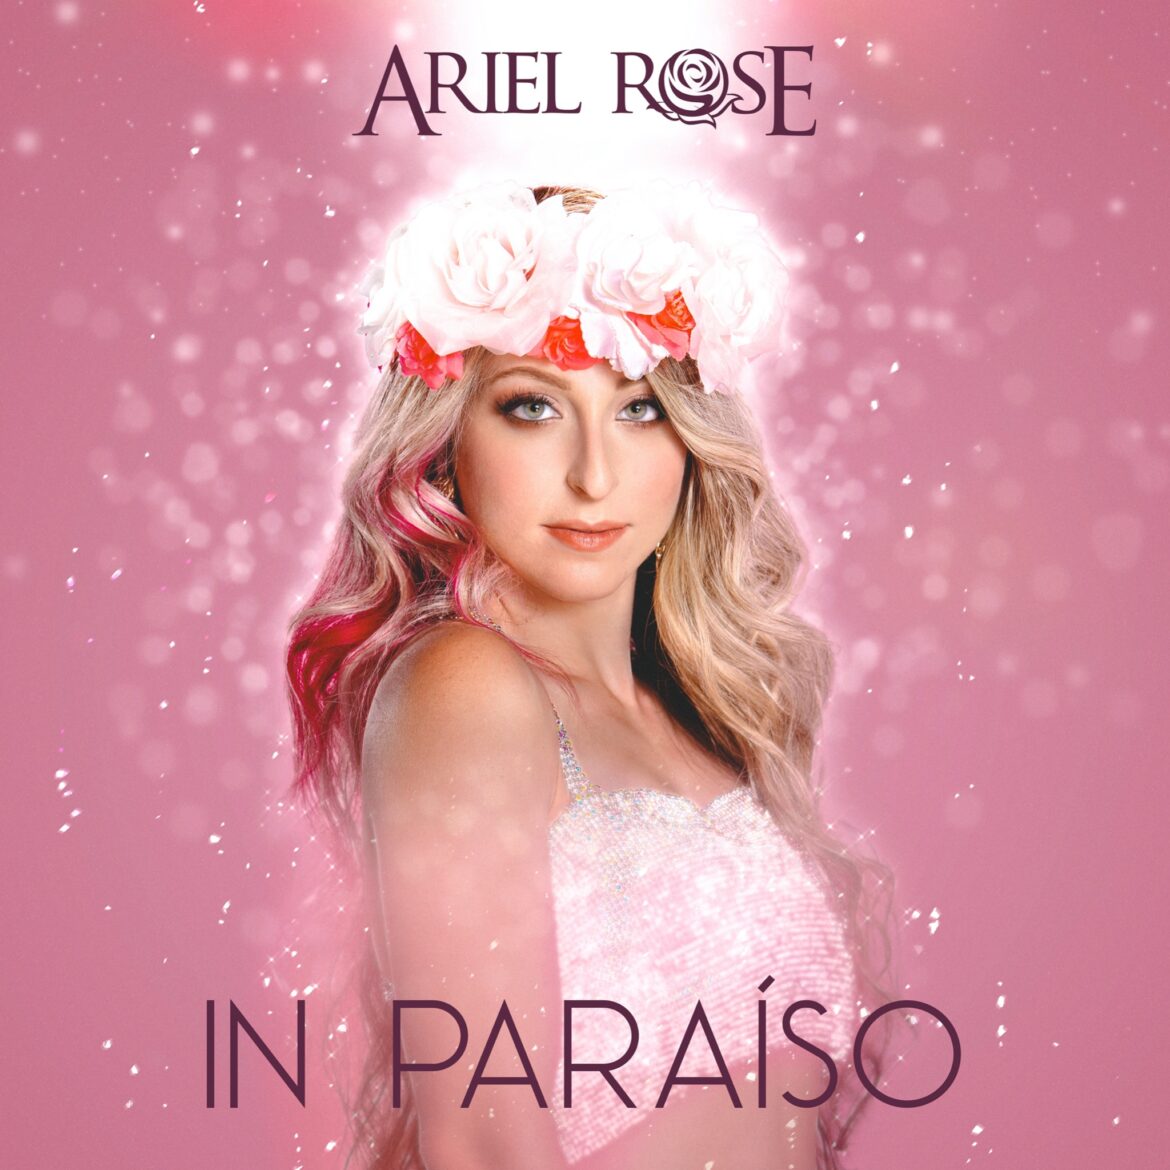 Ariel Rose presents multi-genre EP “In Paraíso;” drops music video for “Atrapada” produced by  Tony Succar